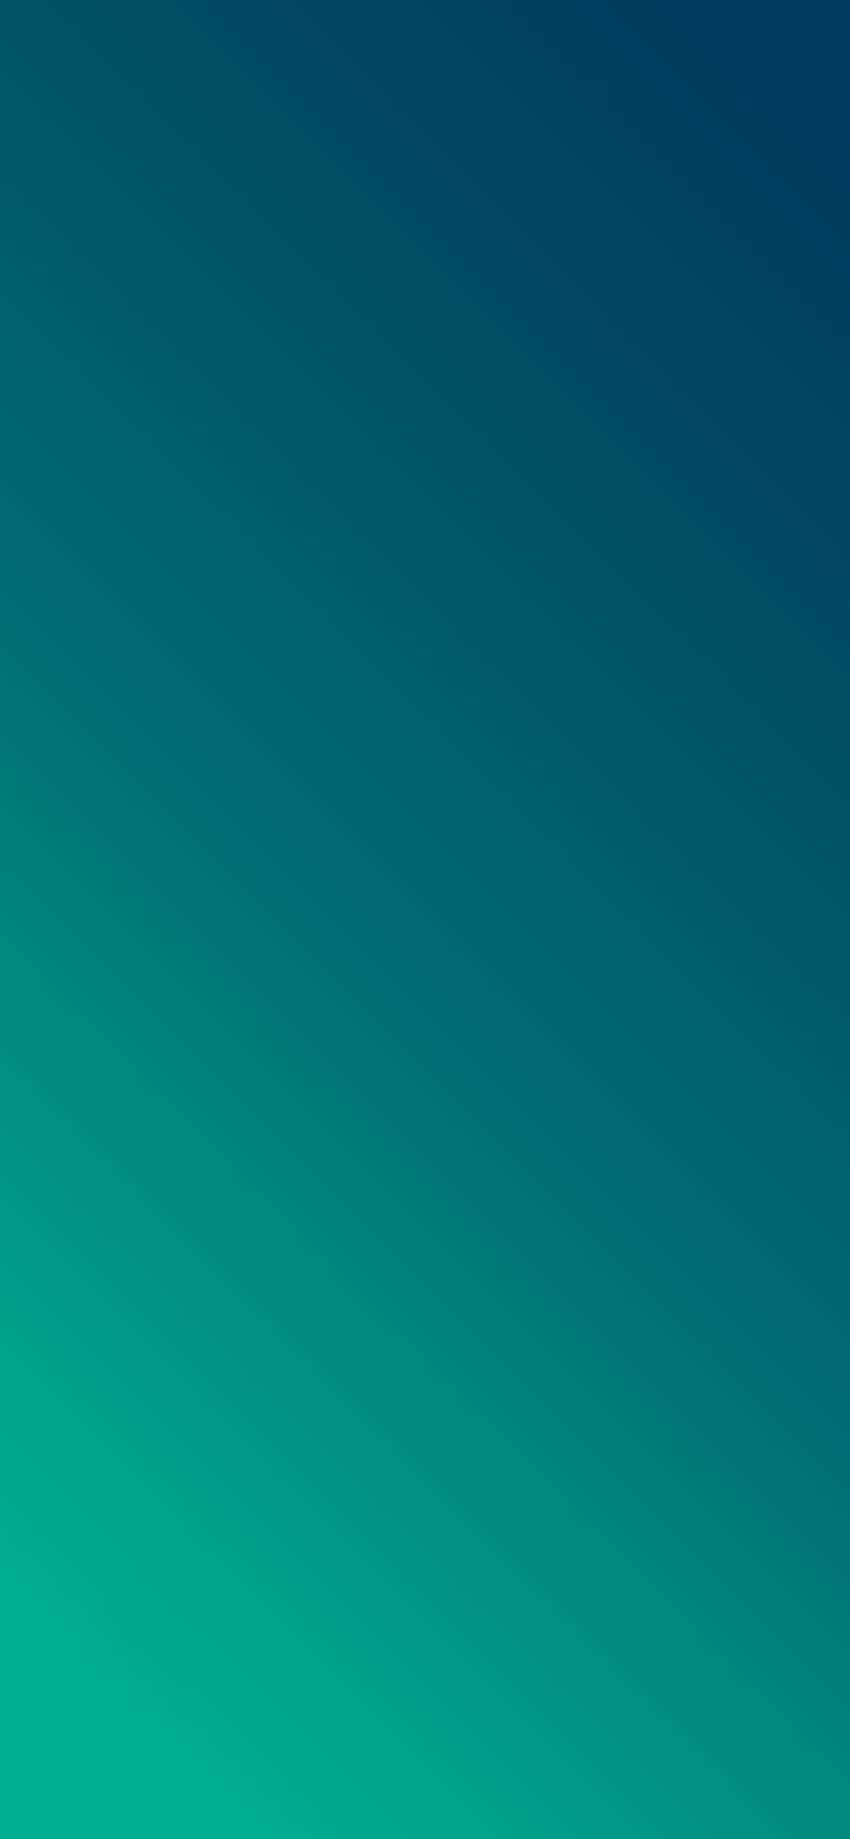 Clean - Blue and Green Gradient HD phone wallpaper